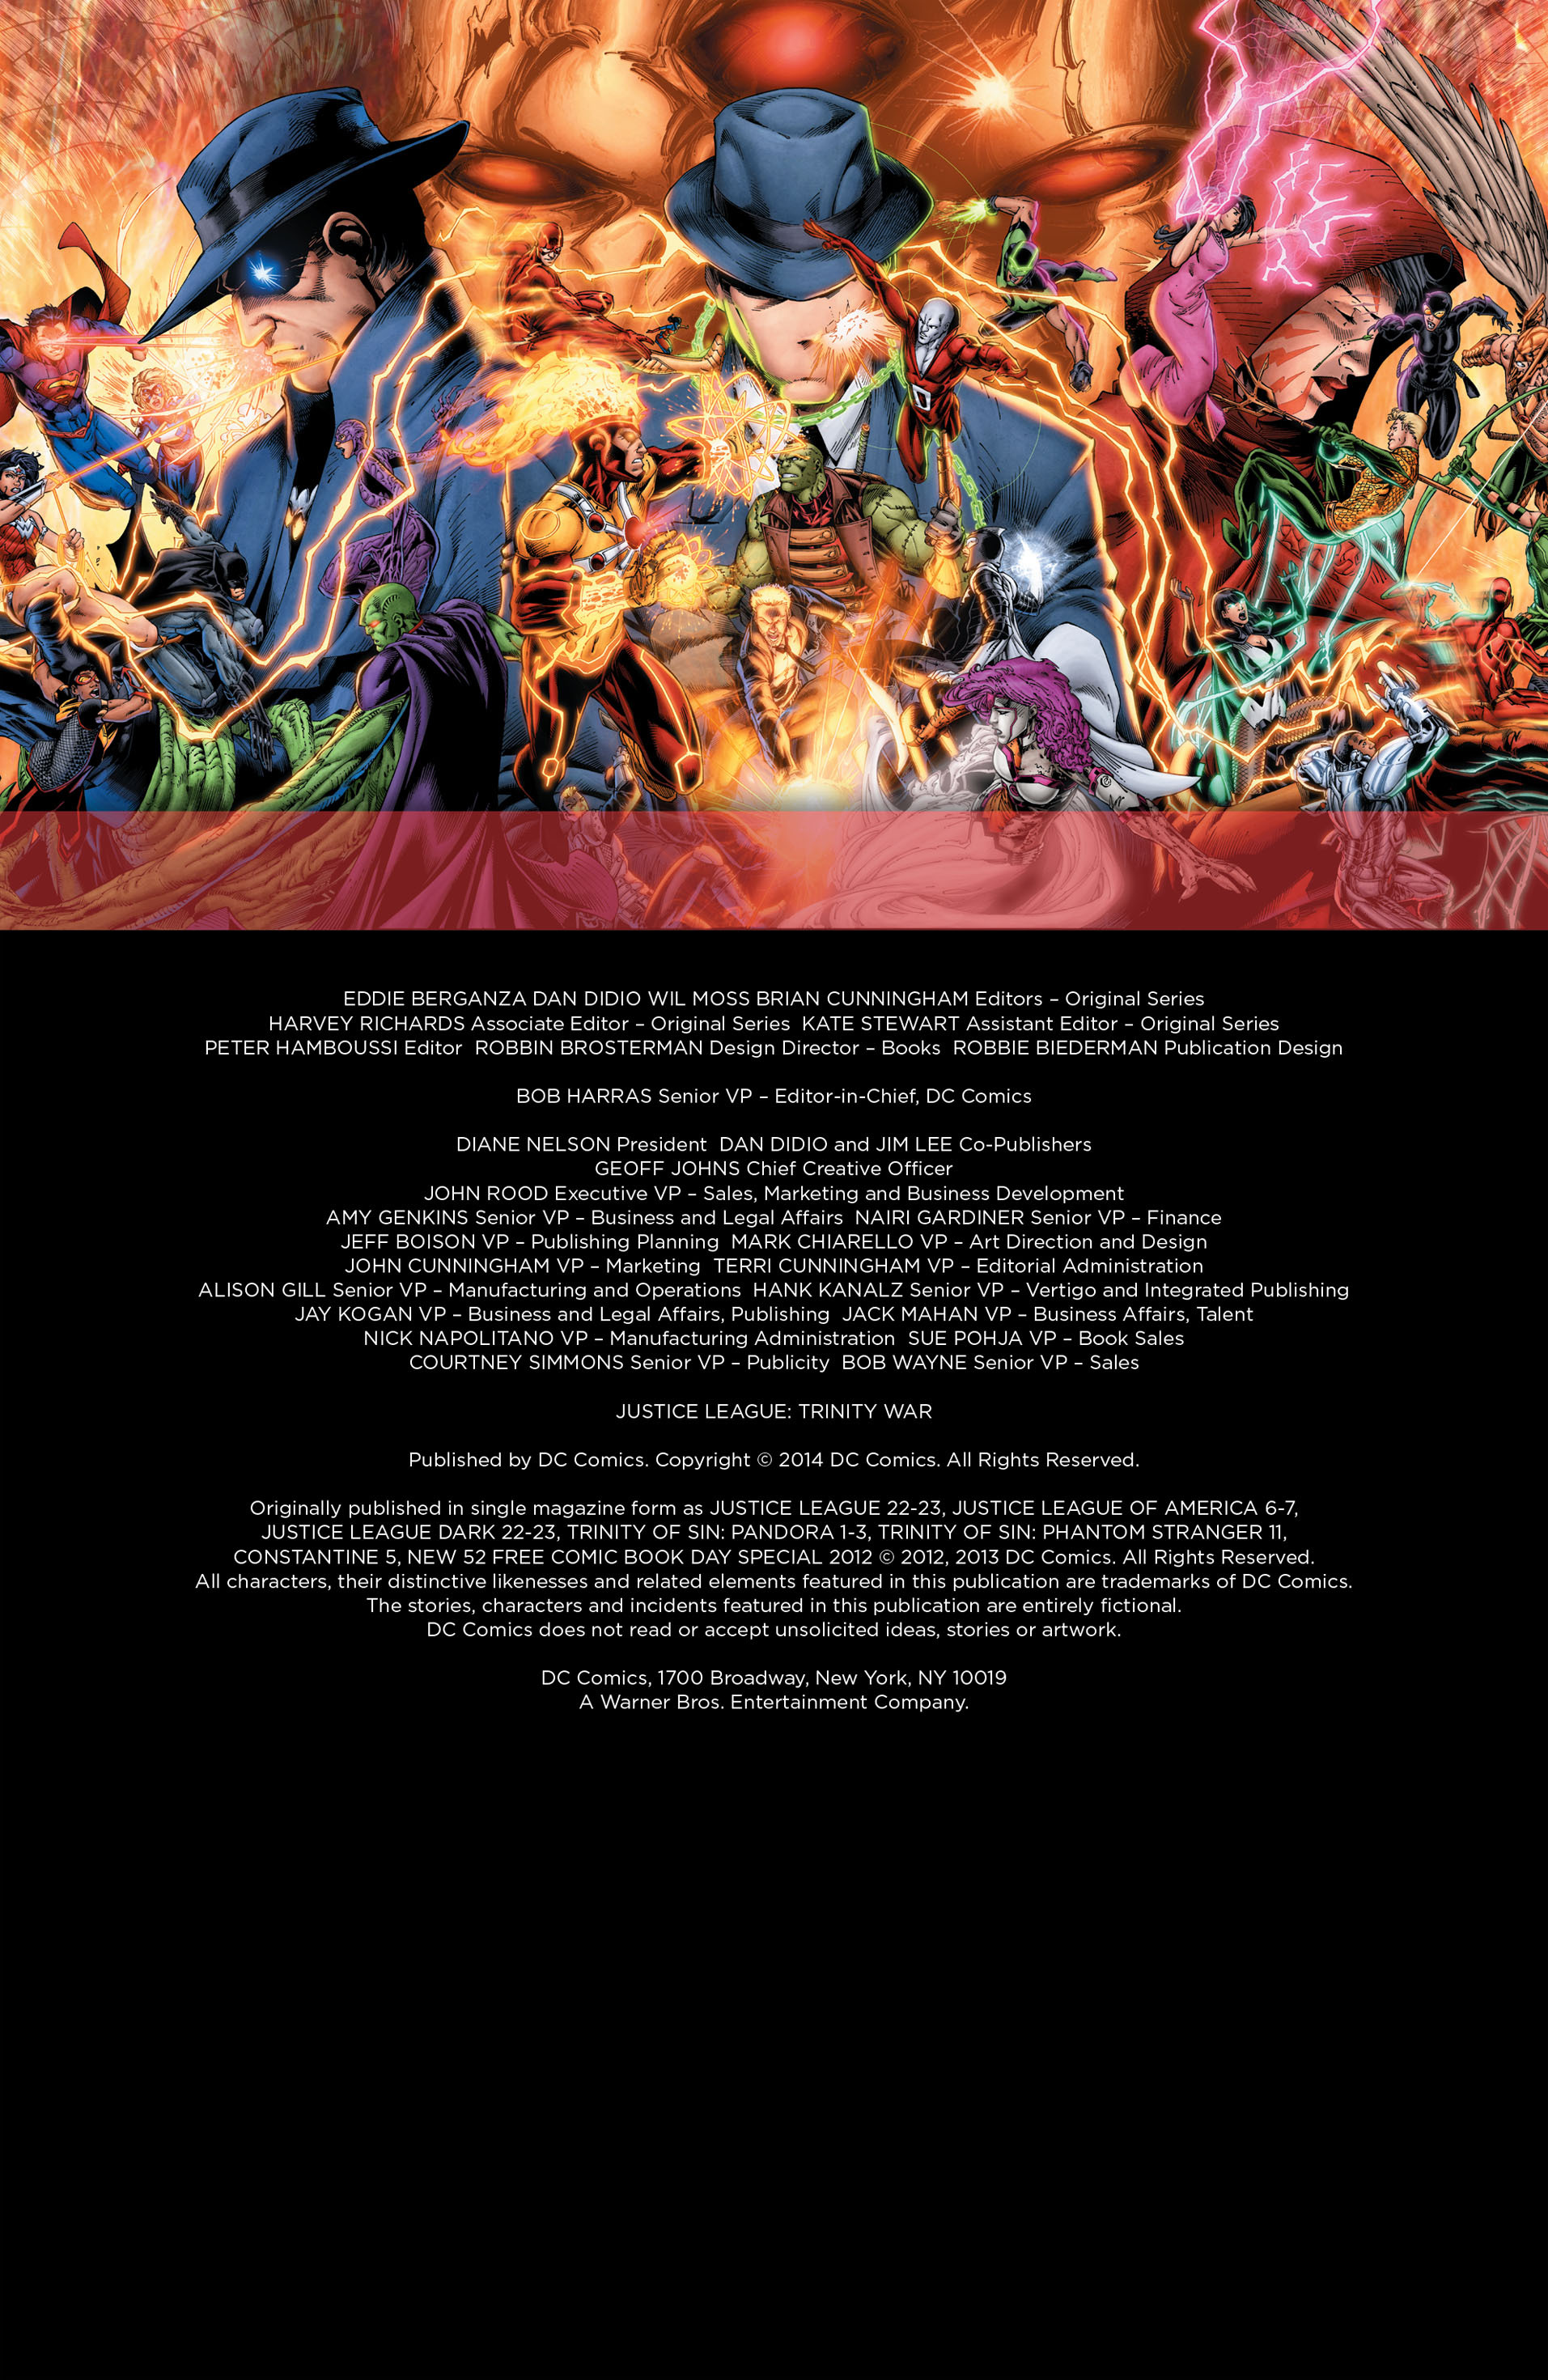 Read online Justice League: Trinity War comic -  Issue # Full - 4